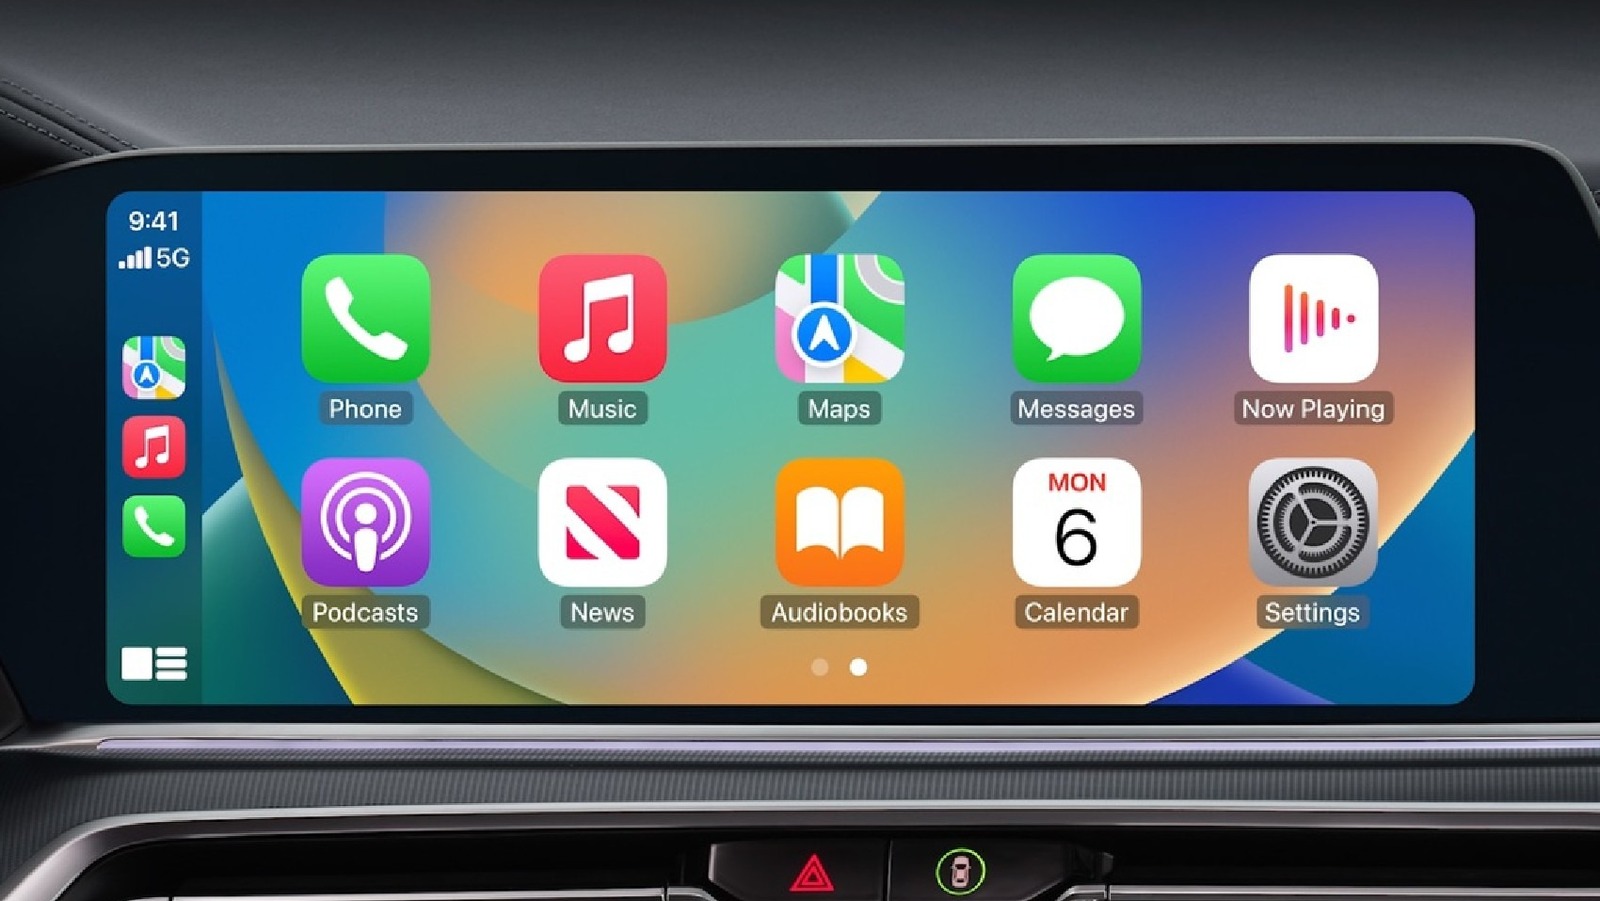 What the Next Generation of Apple CarPlay looks like